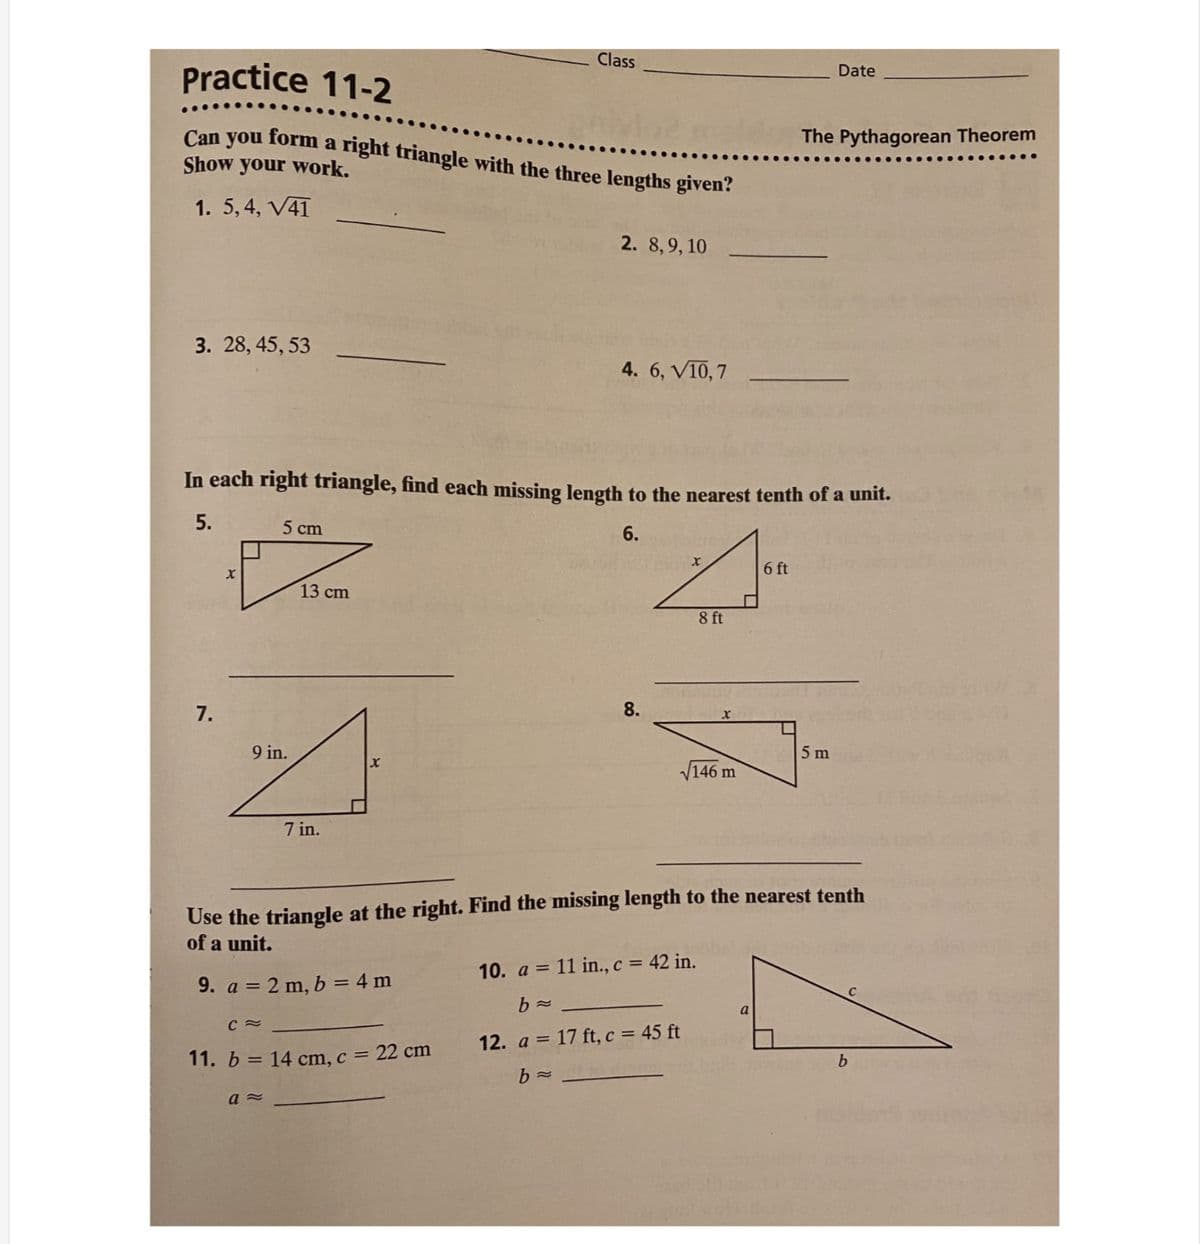 Class
Practice 11-2
Date
Can you form a right triangle with the three lengths given?
The Pythagorean Theorem
Show your work.
1. 5, 4, V41
2. 8,9, 10
3. 28, 45, 53
4. 6, VI0, 7
In each right triangle, find each missing length to the nearest tenth of a unit.
5.
5 cm
6.
6 ft
13 cm
8 ft
7.
8.
9 in.
5 m
V146 m
7 in.
Use the triangle at the right. Find the missing length to the nearest tenth
of a unit.
10. a = 11 in., c = 42 in.
9. a = 2 m, b = 4 m
a
12. a = 17 ft, c = 45 ft
11. b = 14 cm, c = 22 cm
b
